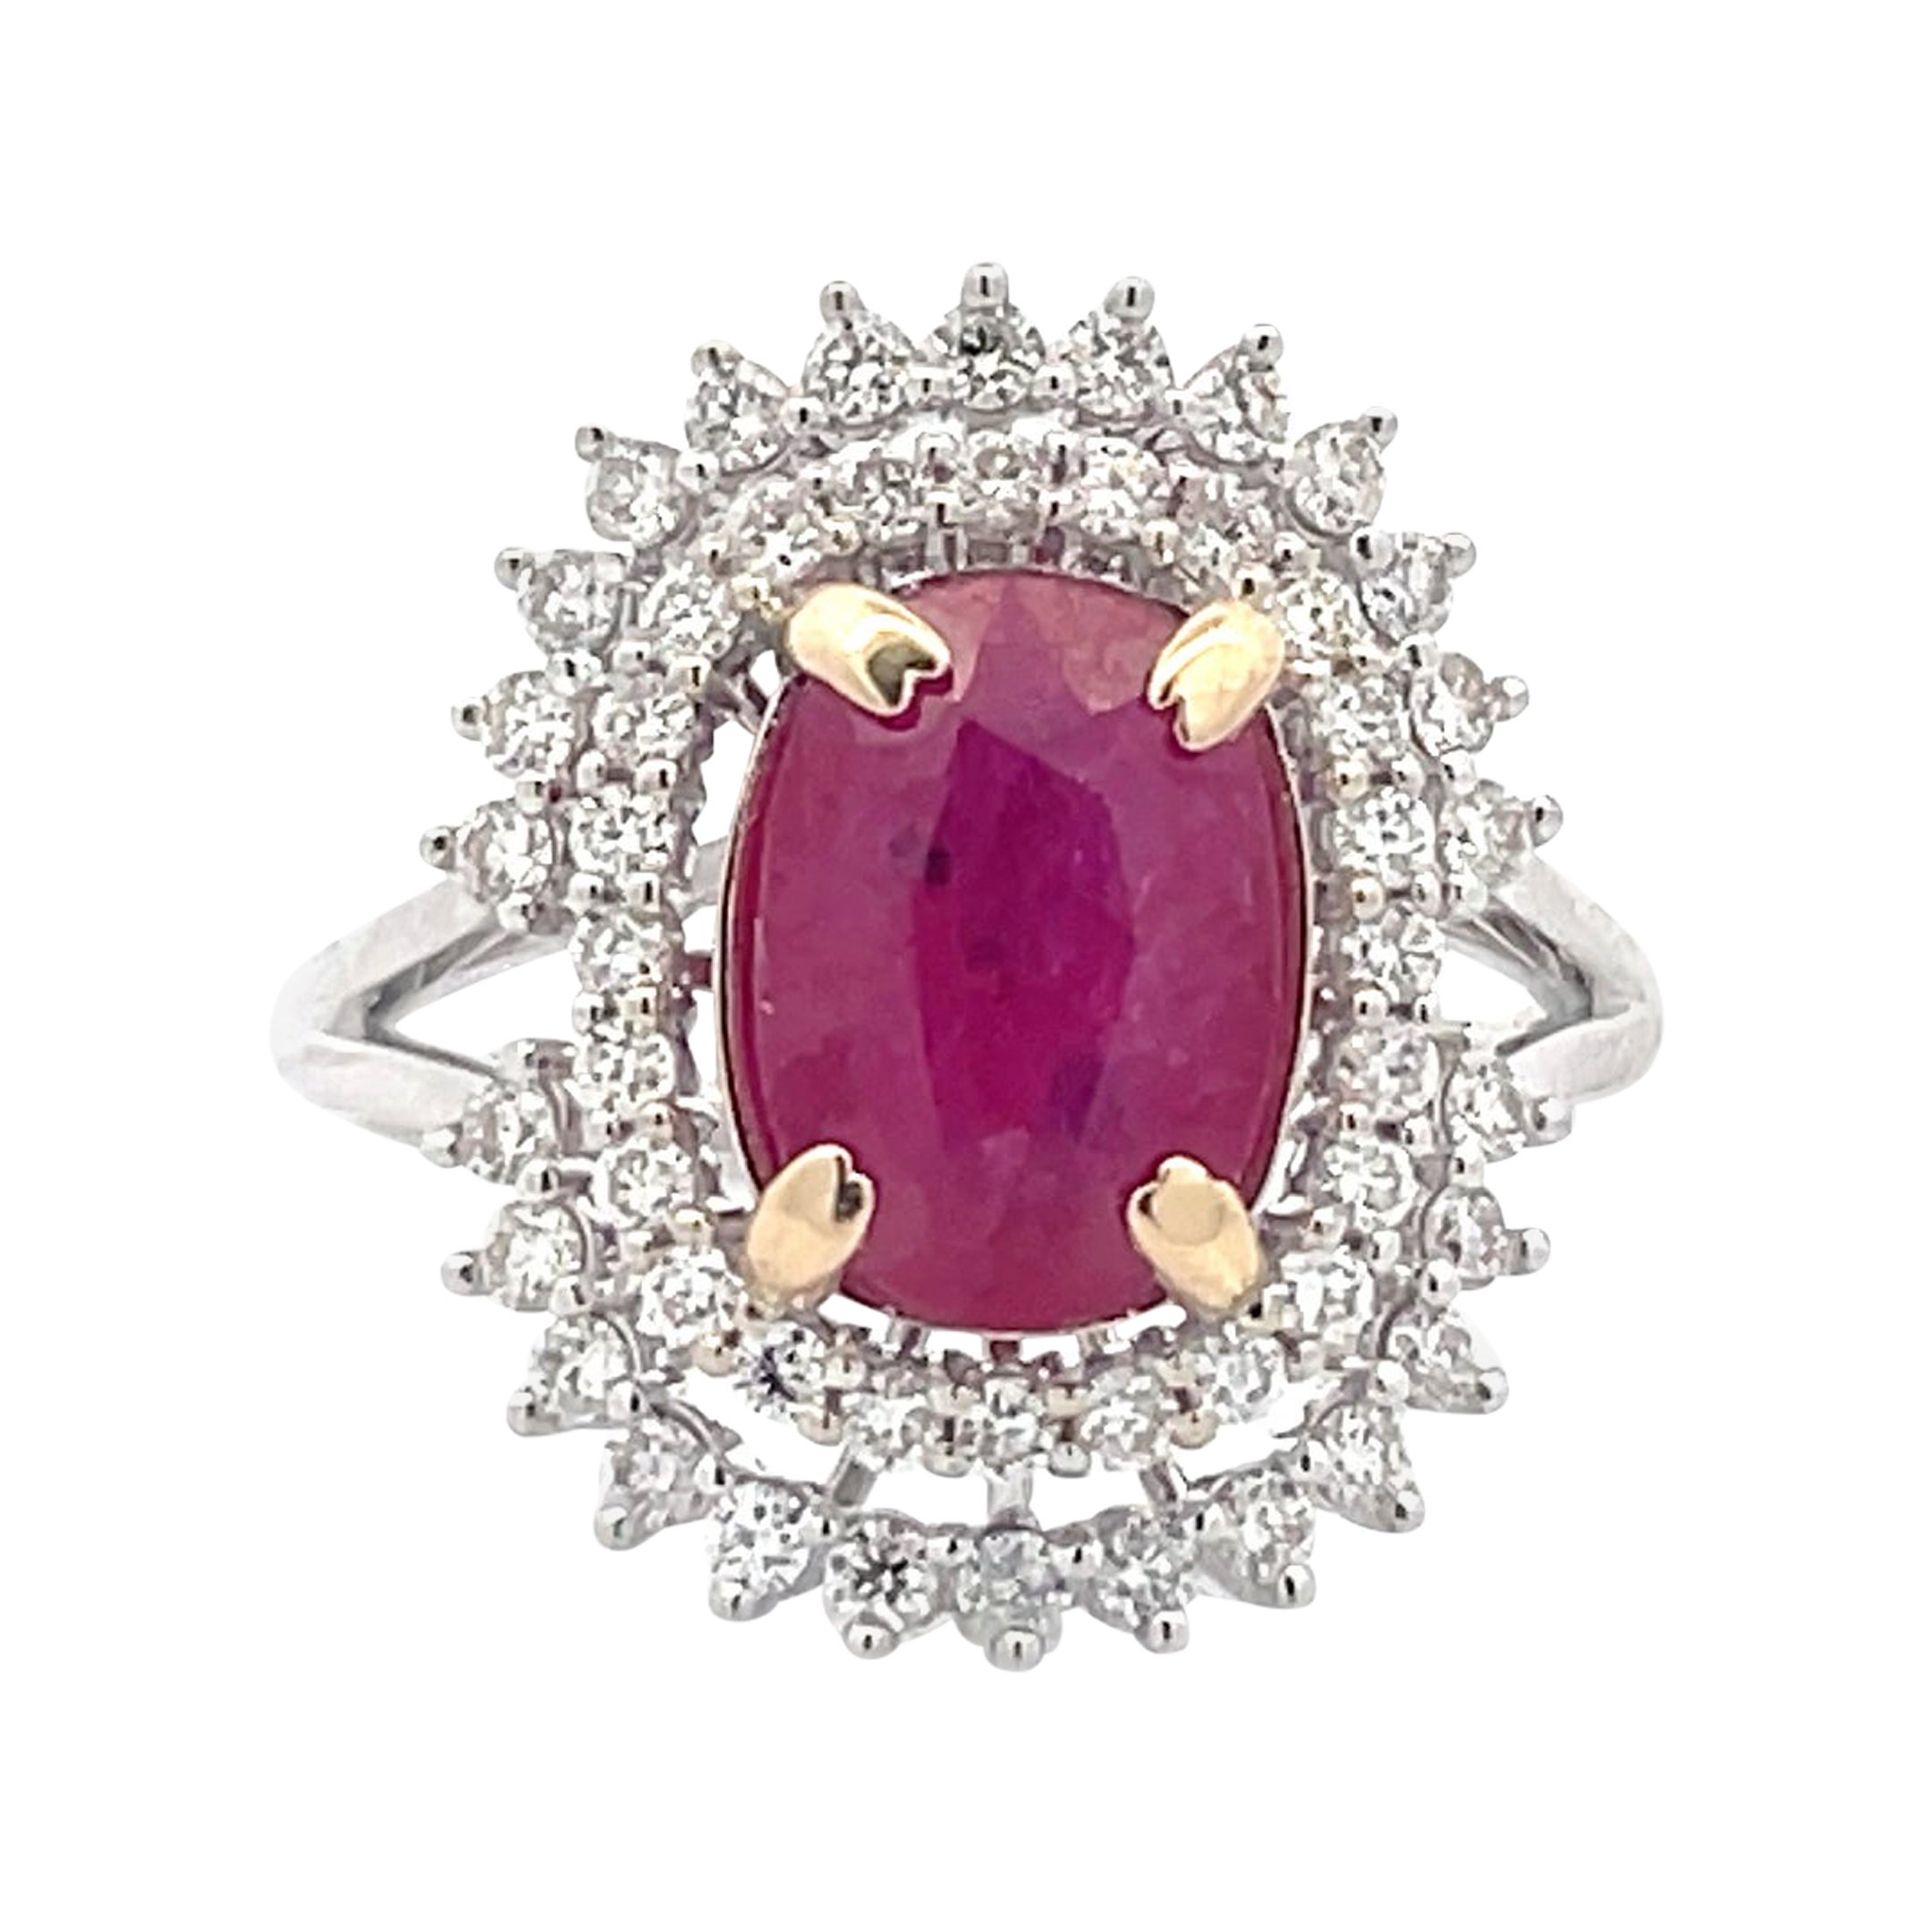 3.0 Ct. Oval Cut Ruby with Floral Diamond Cluster Engagement Ring in 14k Gold